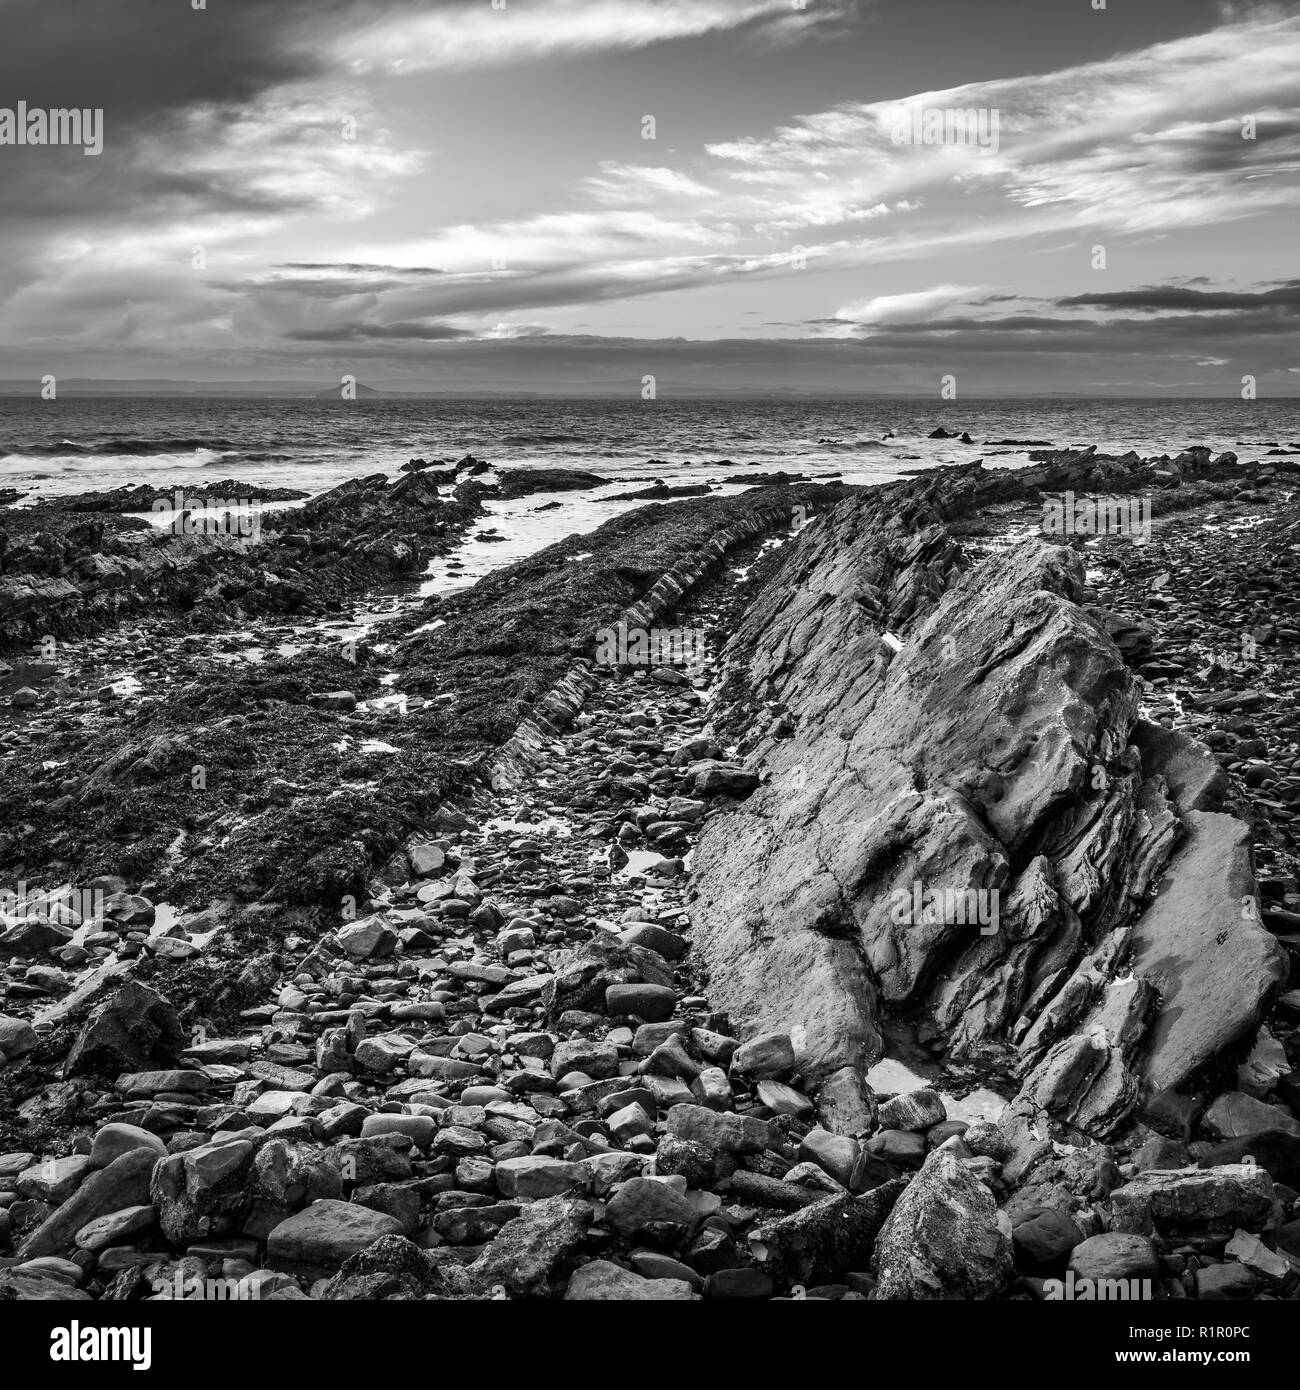 The rocky beach at St Monans in Fife, Scotland where volcanic rock formations protrude through the surface Stock Photo